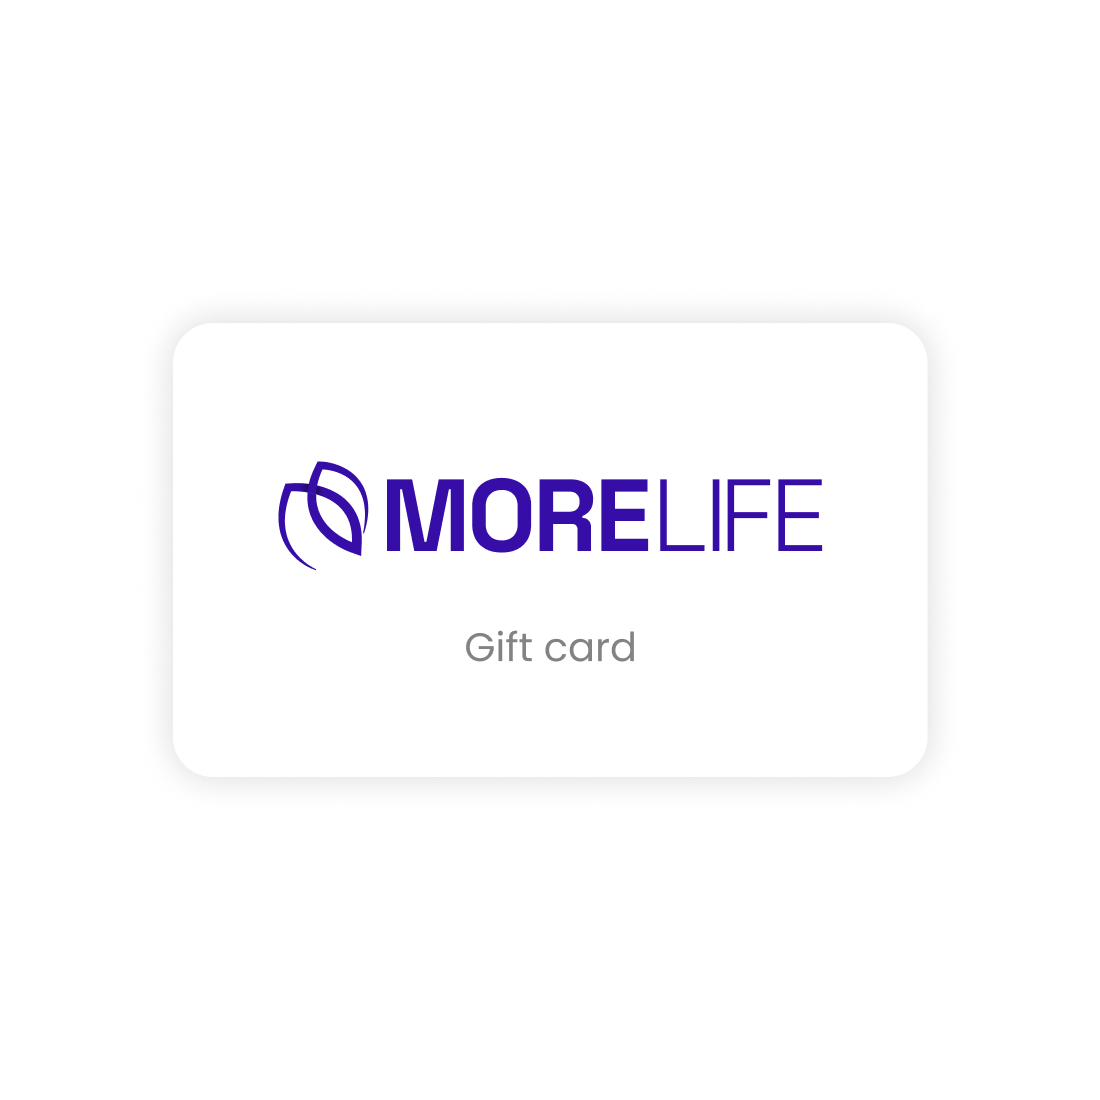 MORE LIFE Gift Card